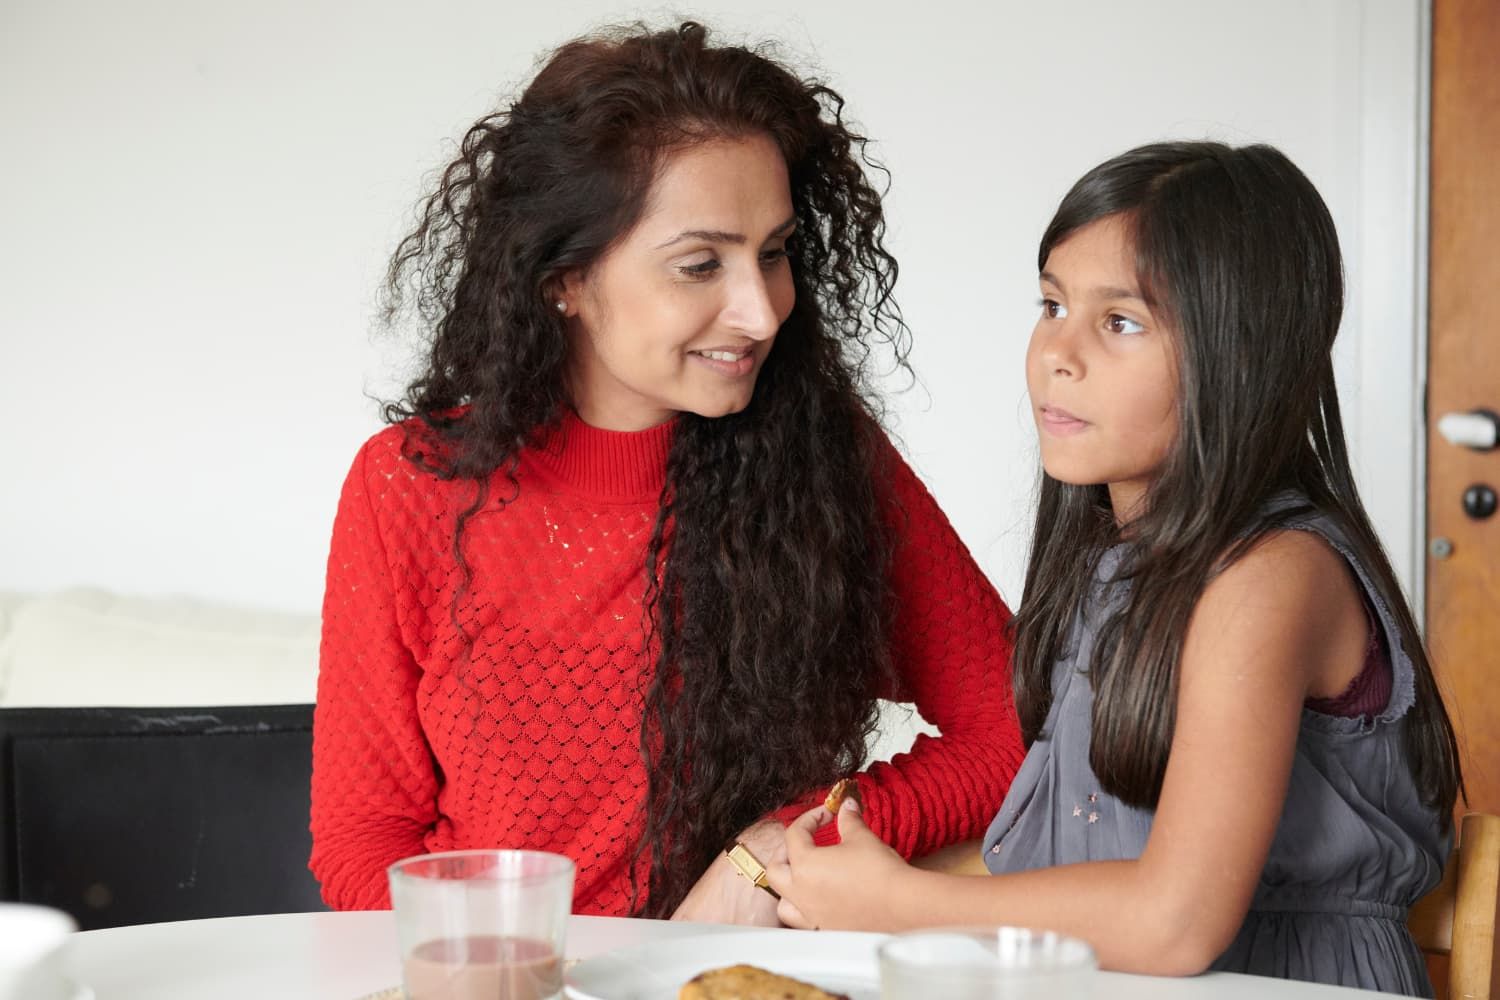 Image depicting a Sunday school teacher attentively observing a young girl, Ava, illustrating the importance of interpreting non-verbal cues in children